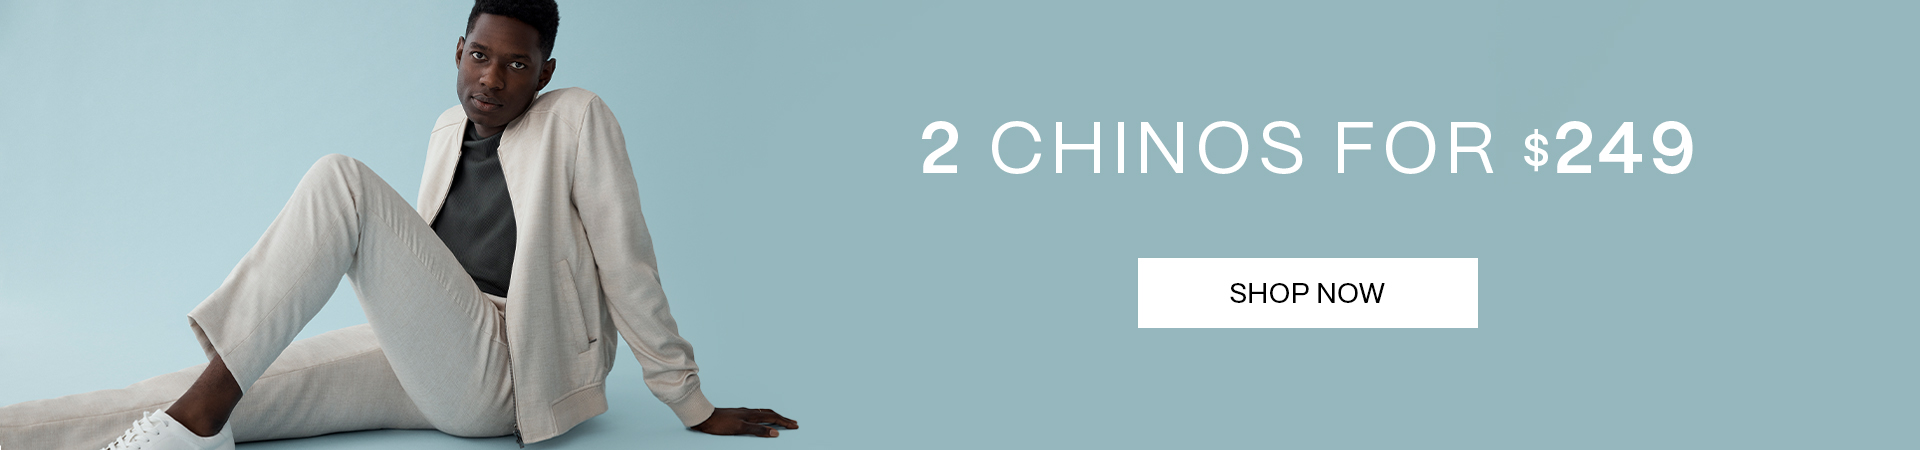 2 chinos for $249